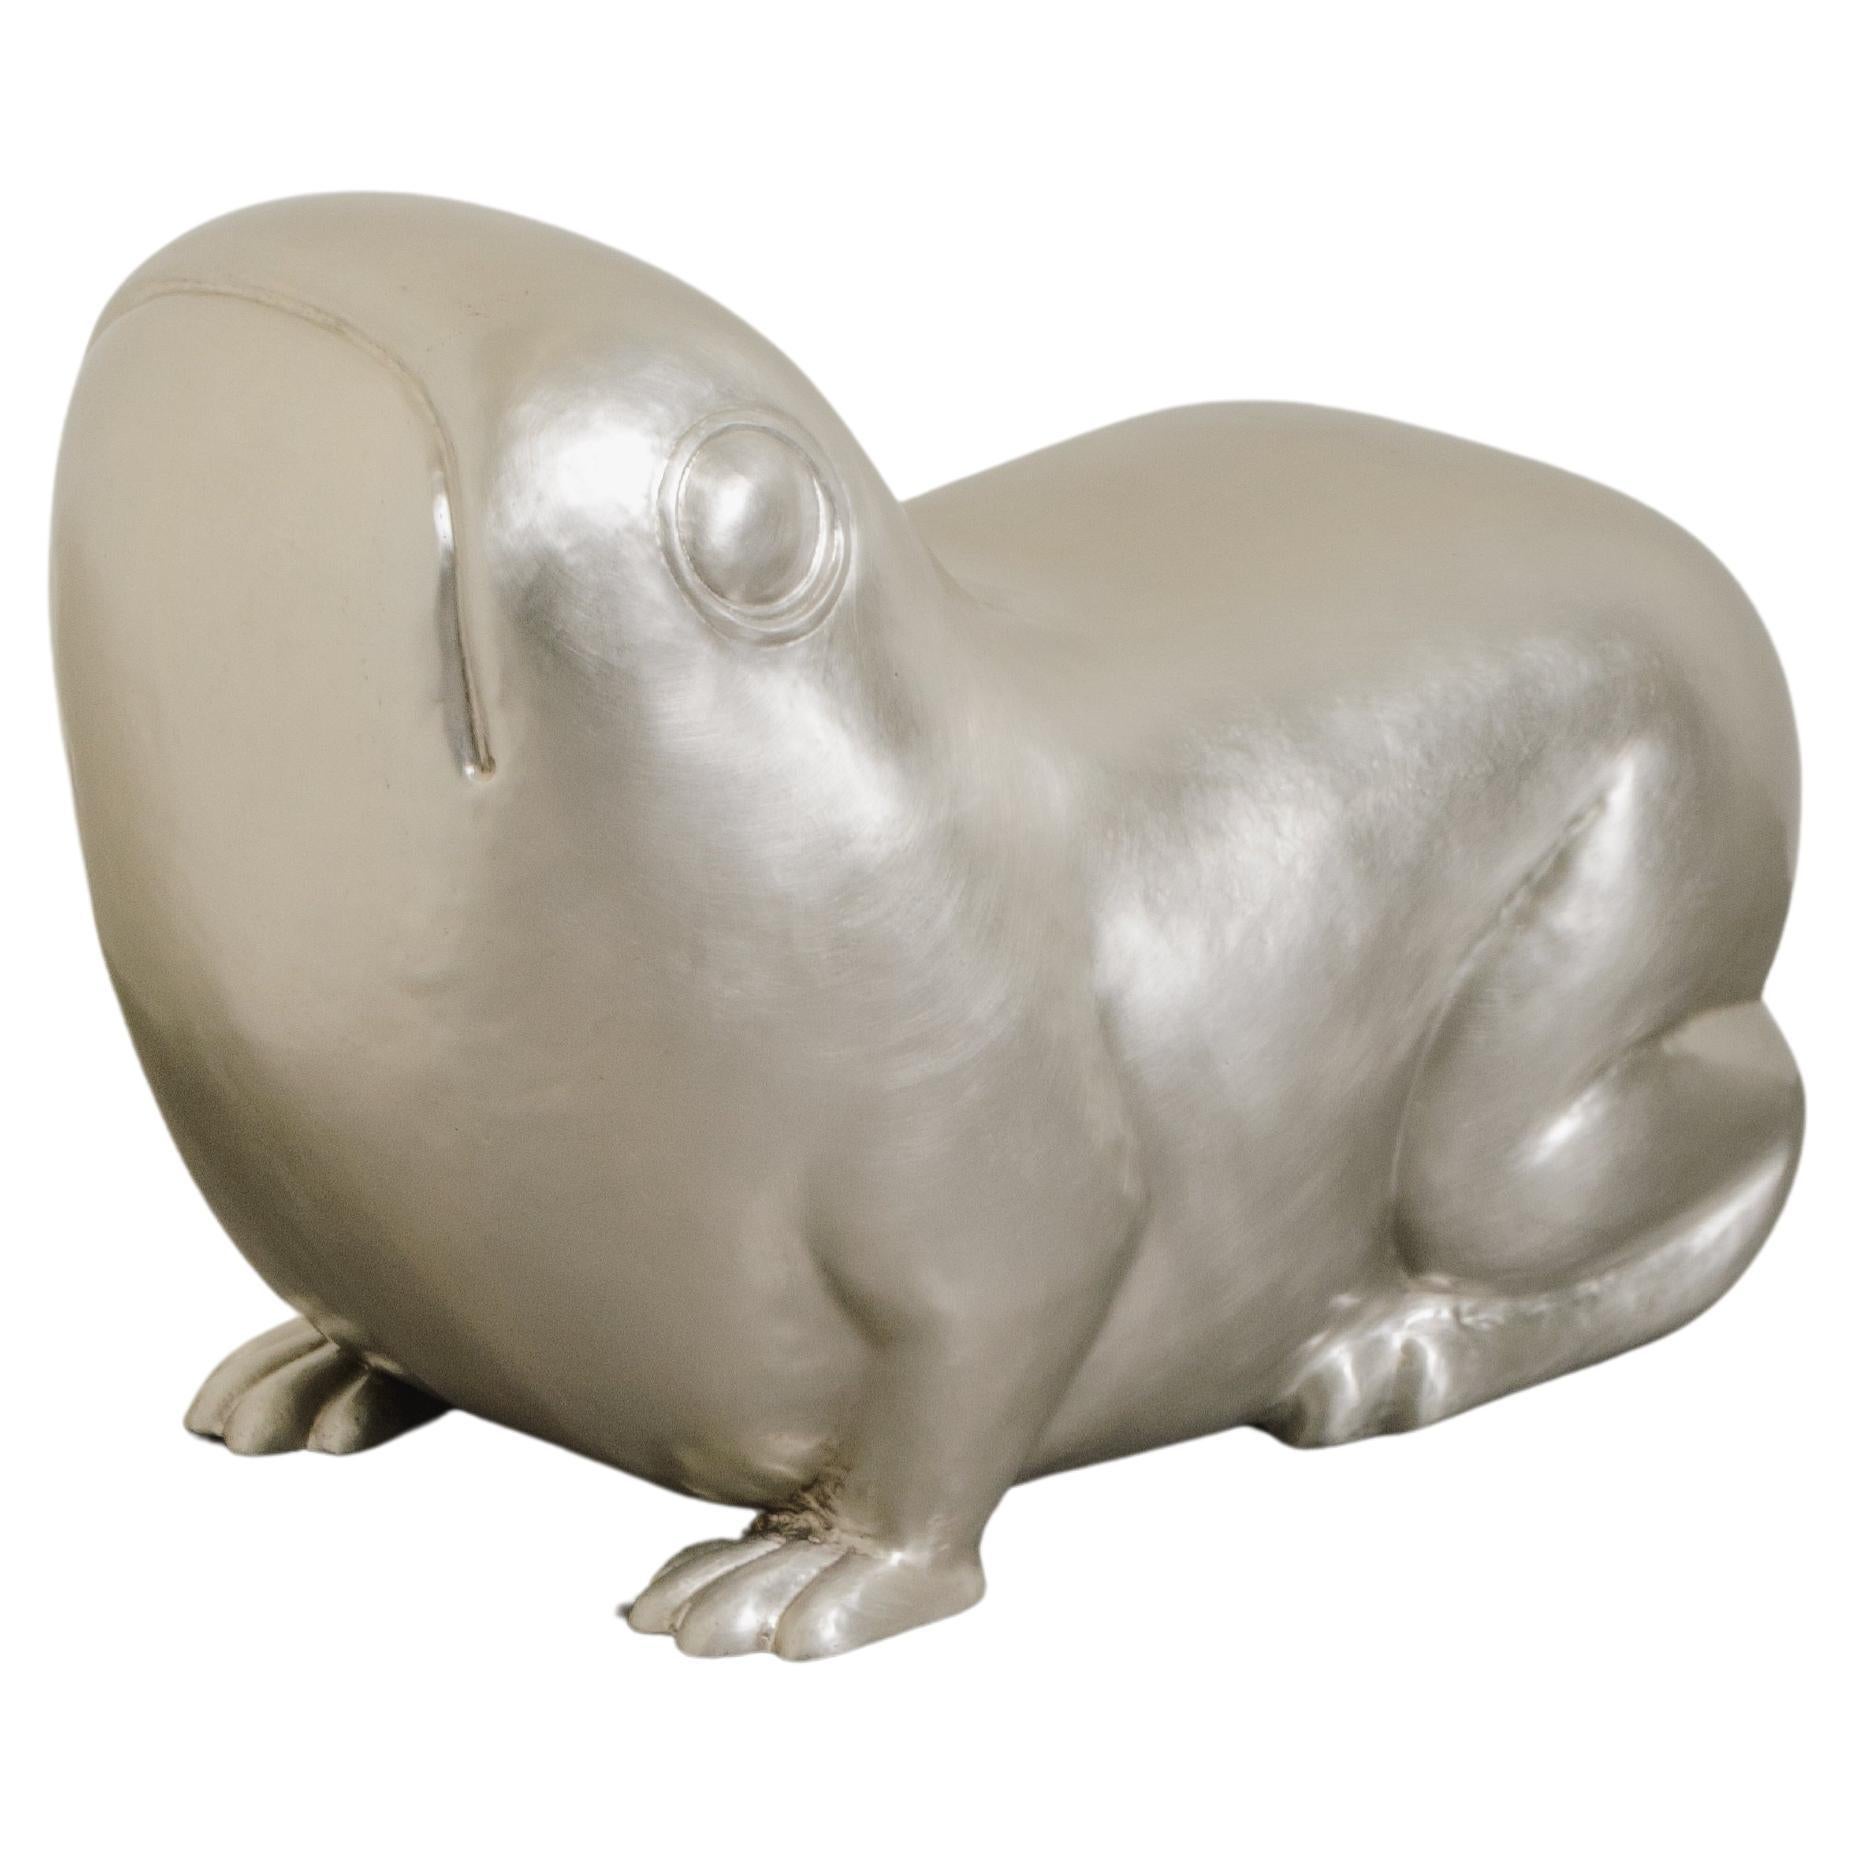 Contemporary Frog Seat in White Bronze by Robert Kuo, Hand Repoussé